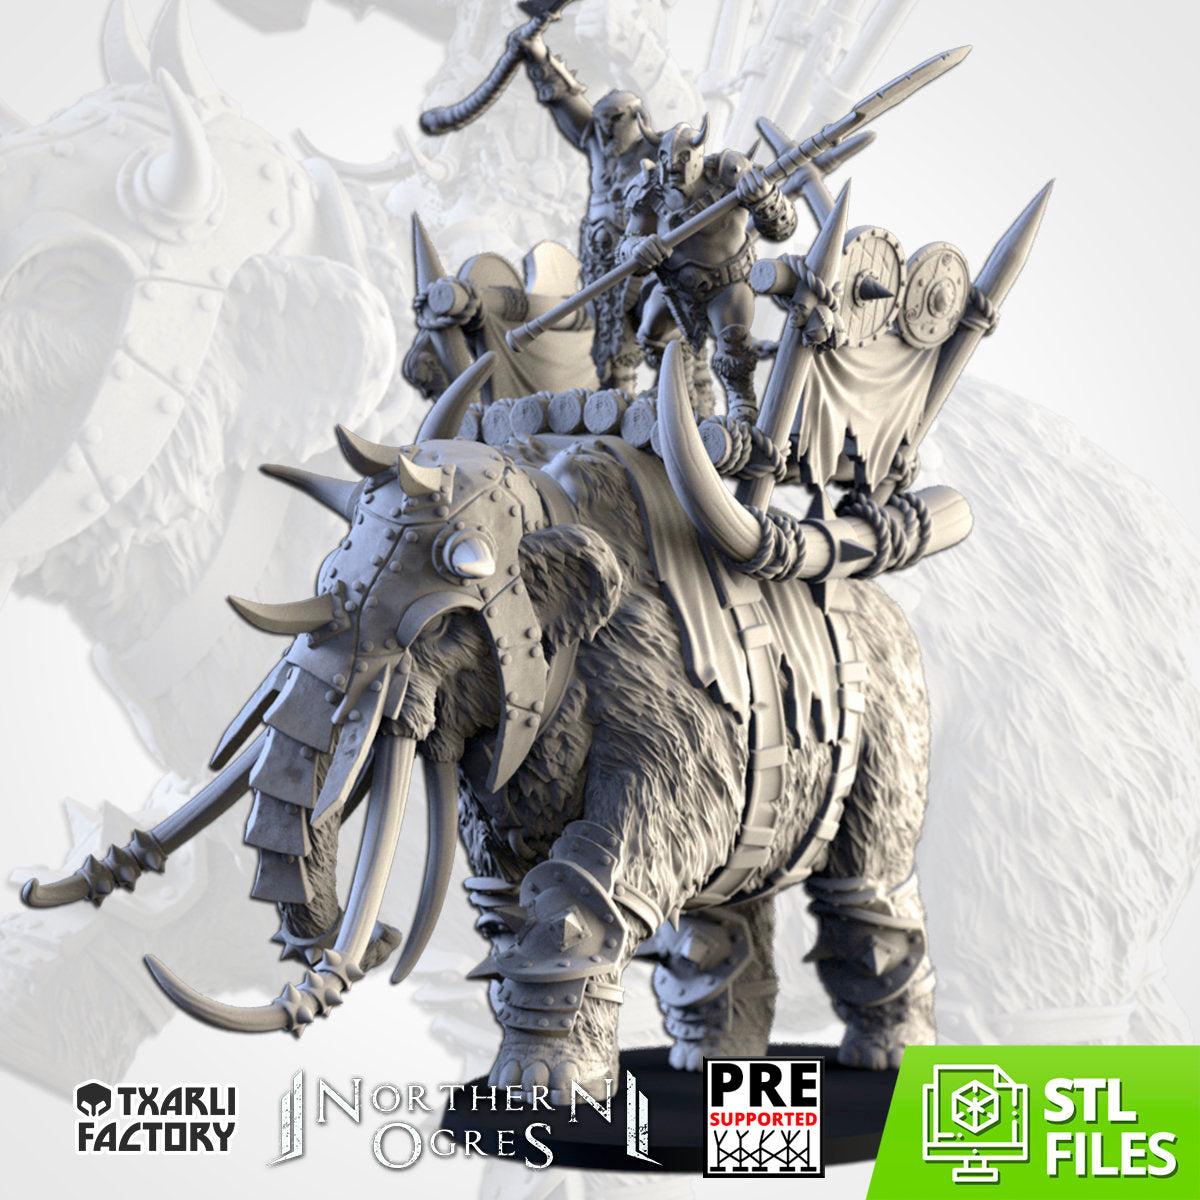 Northern Ogres - Ogres on Mammoth by Txarli Factory